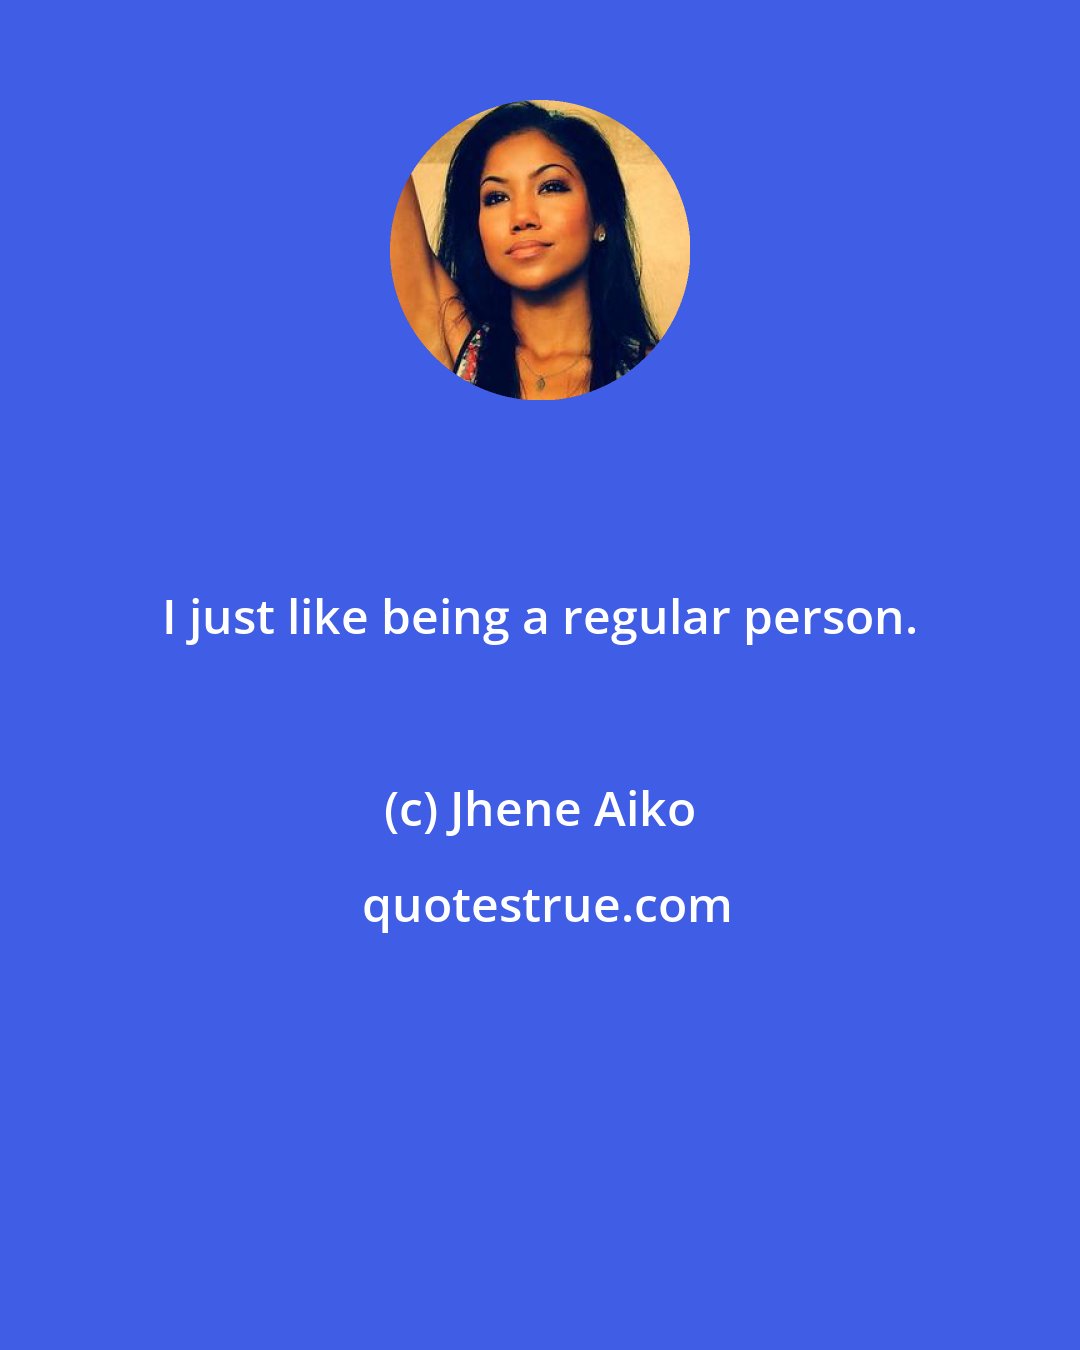 Jhene Aiko: I just like being a regular person.